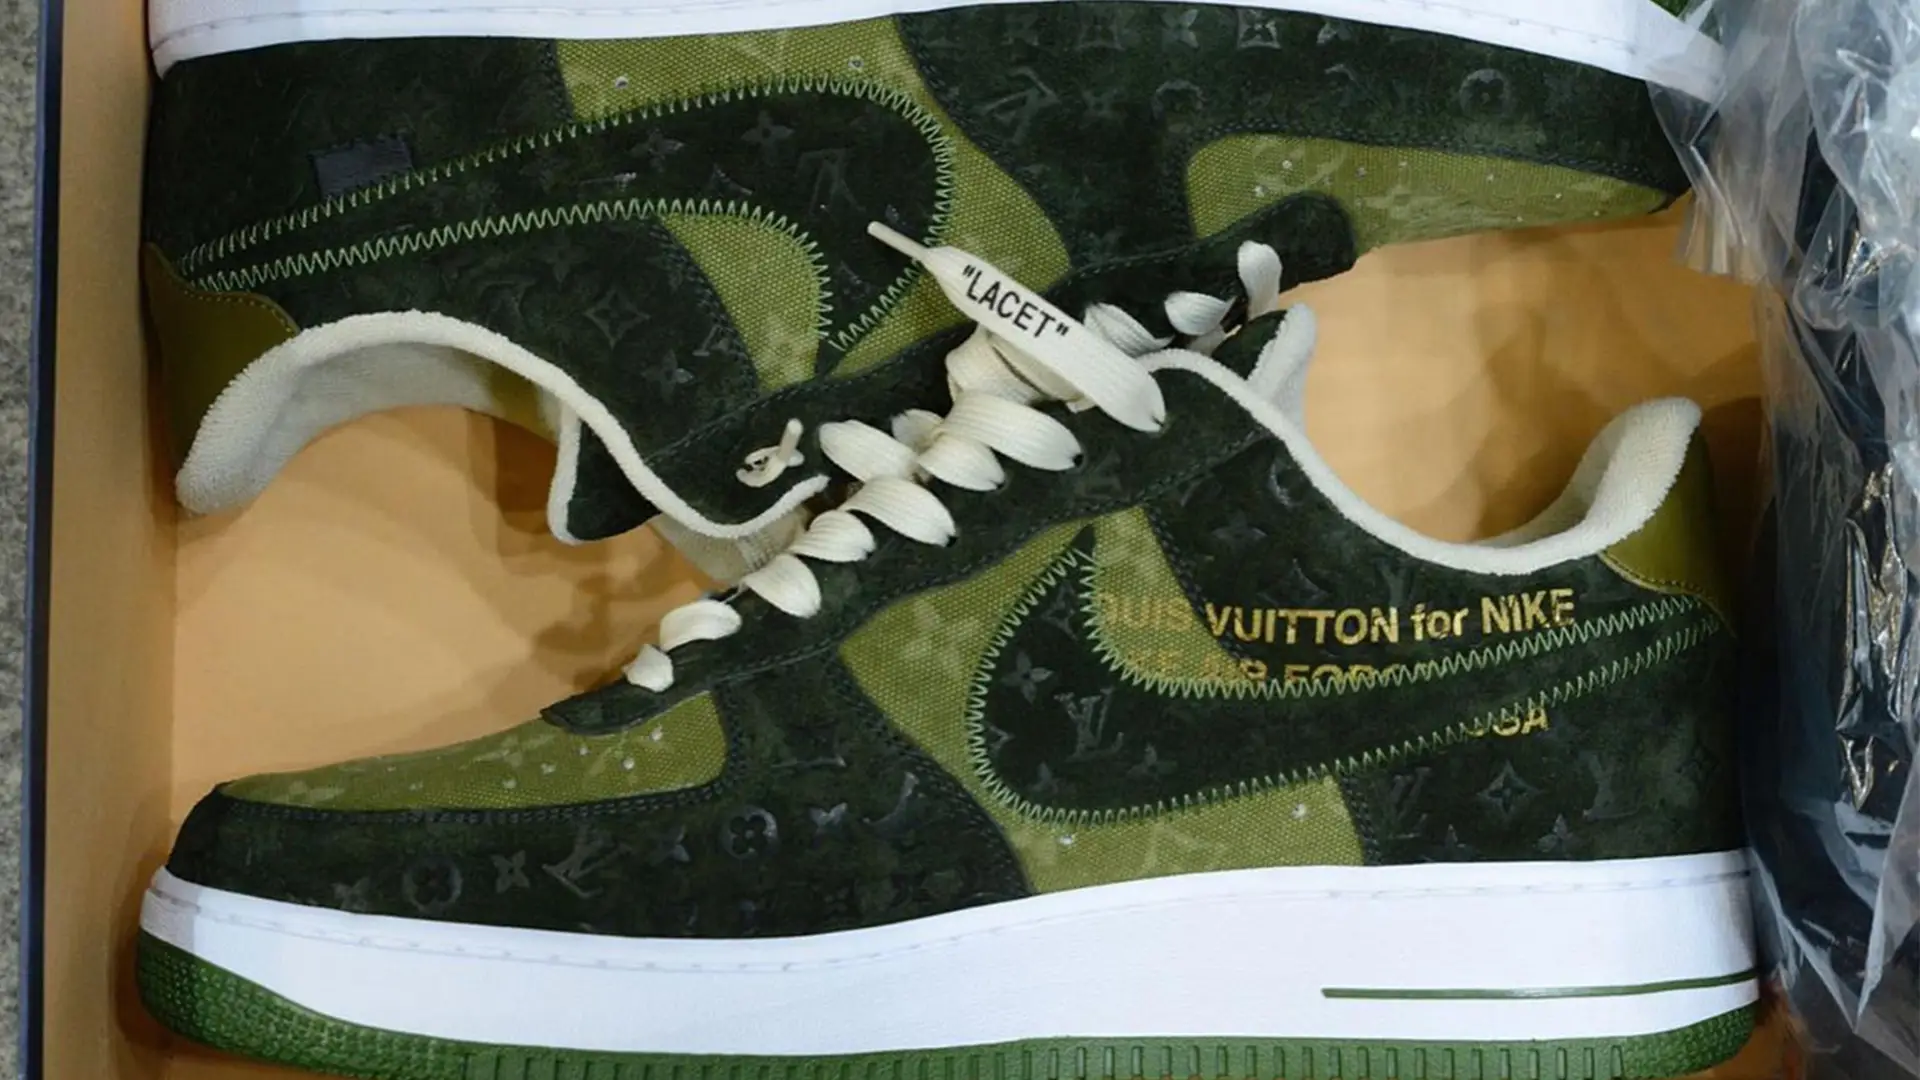 Louis Vuitton's New Skate Sneaker Is Even Bigger (Or at Least the